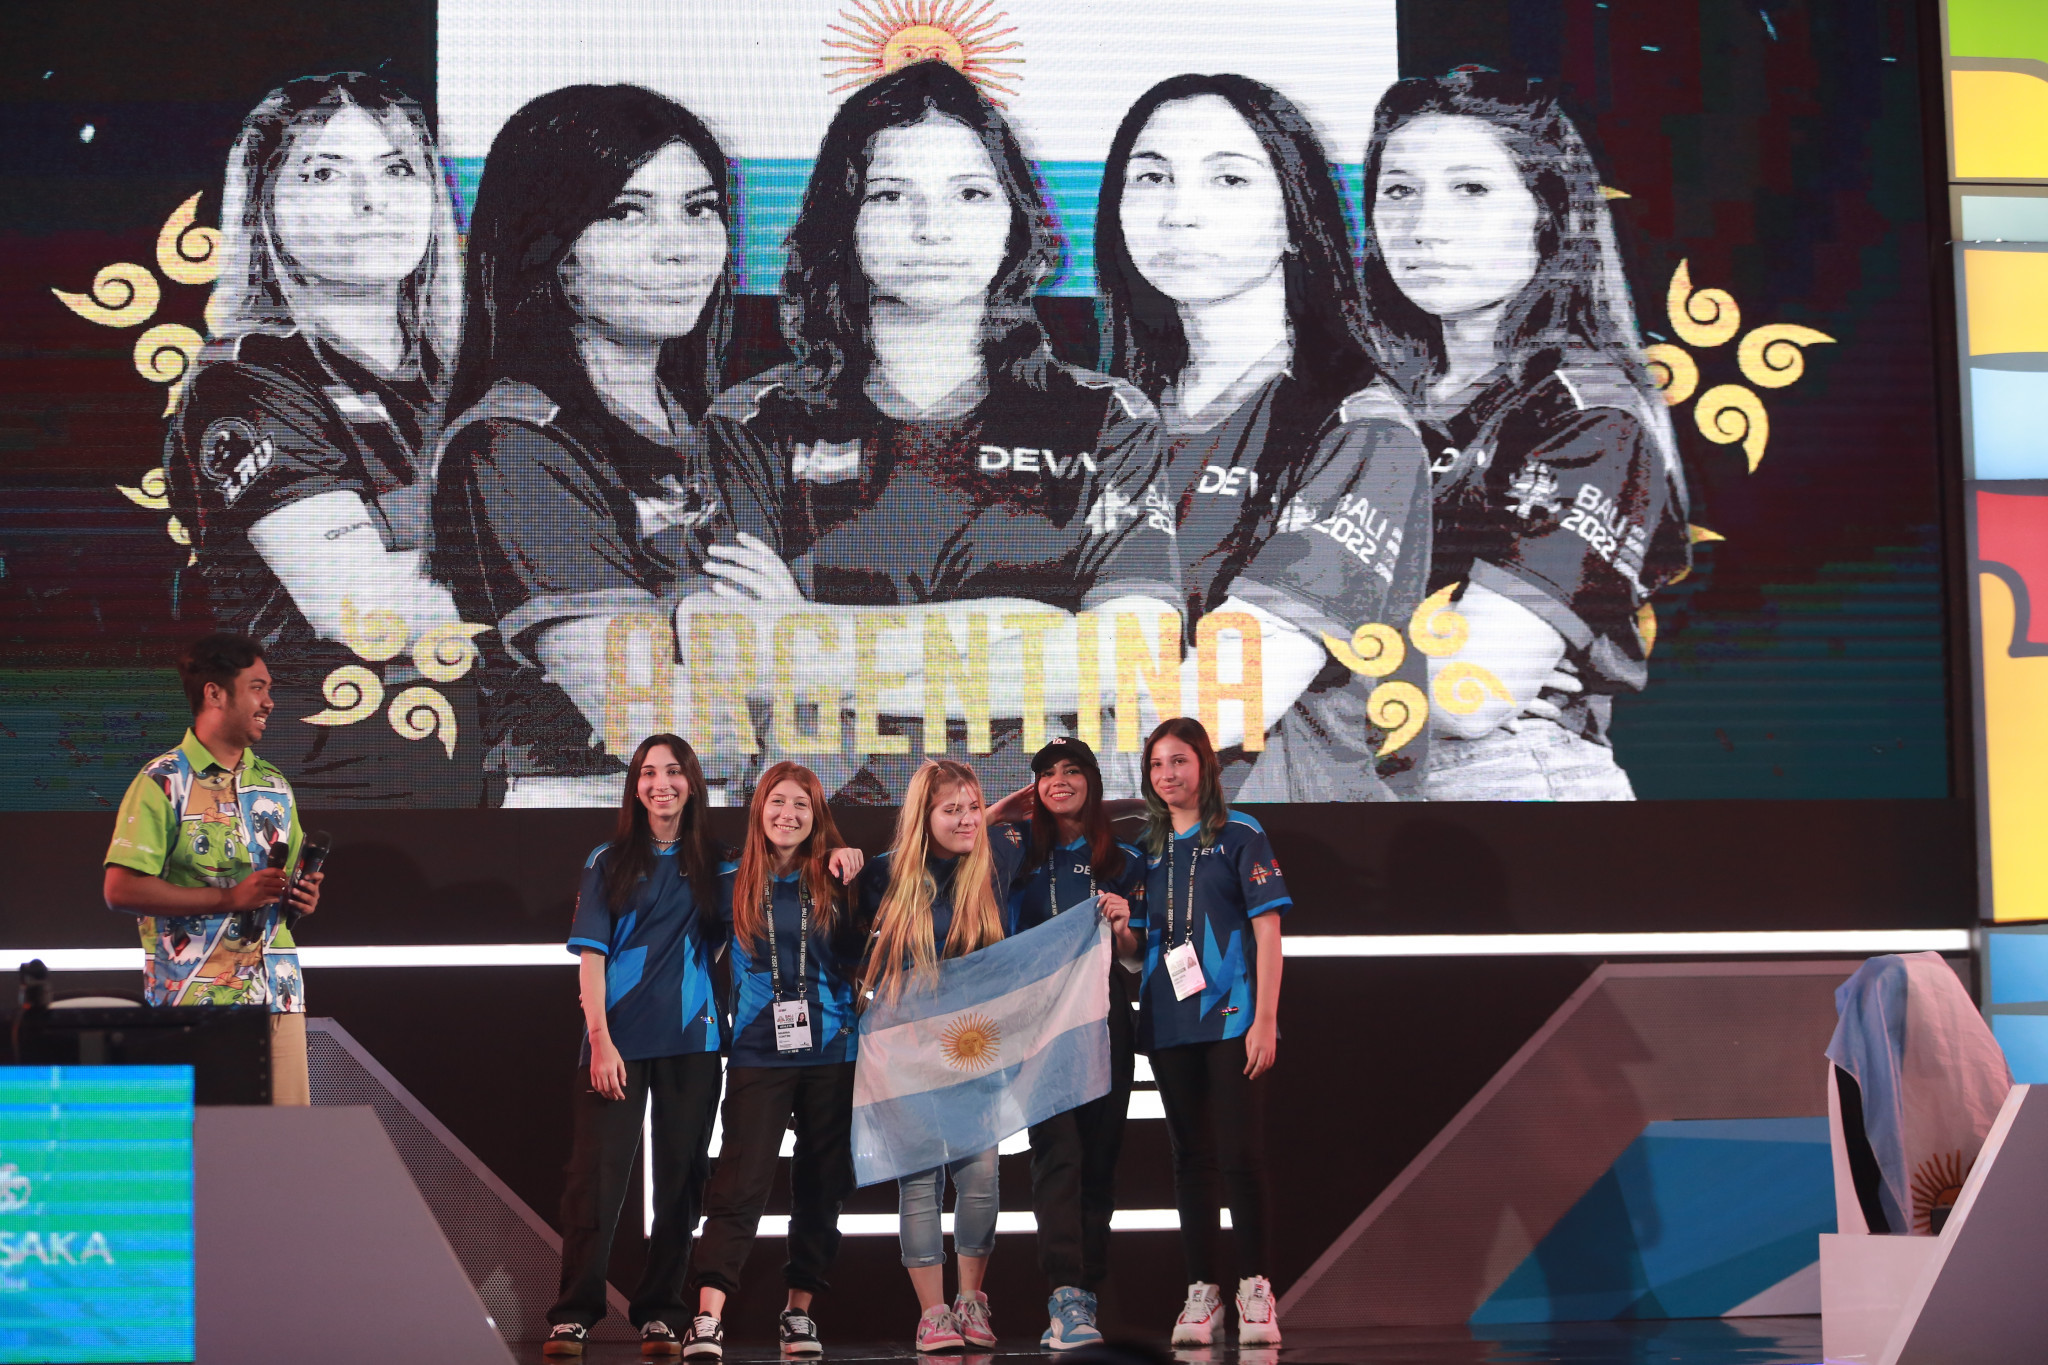 CS:GO female grand final confirmed at IESF World Championships